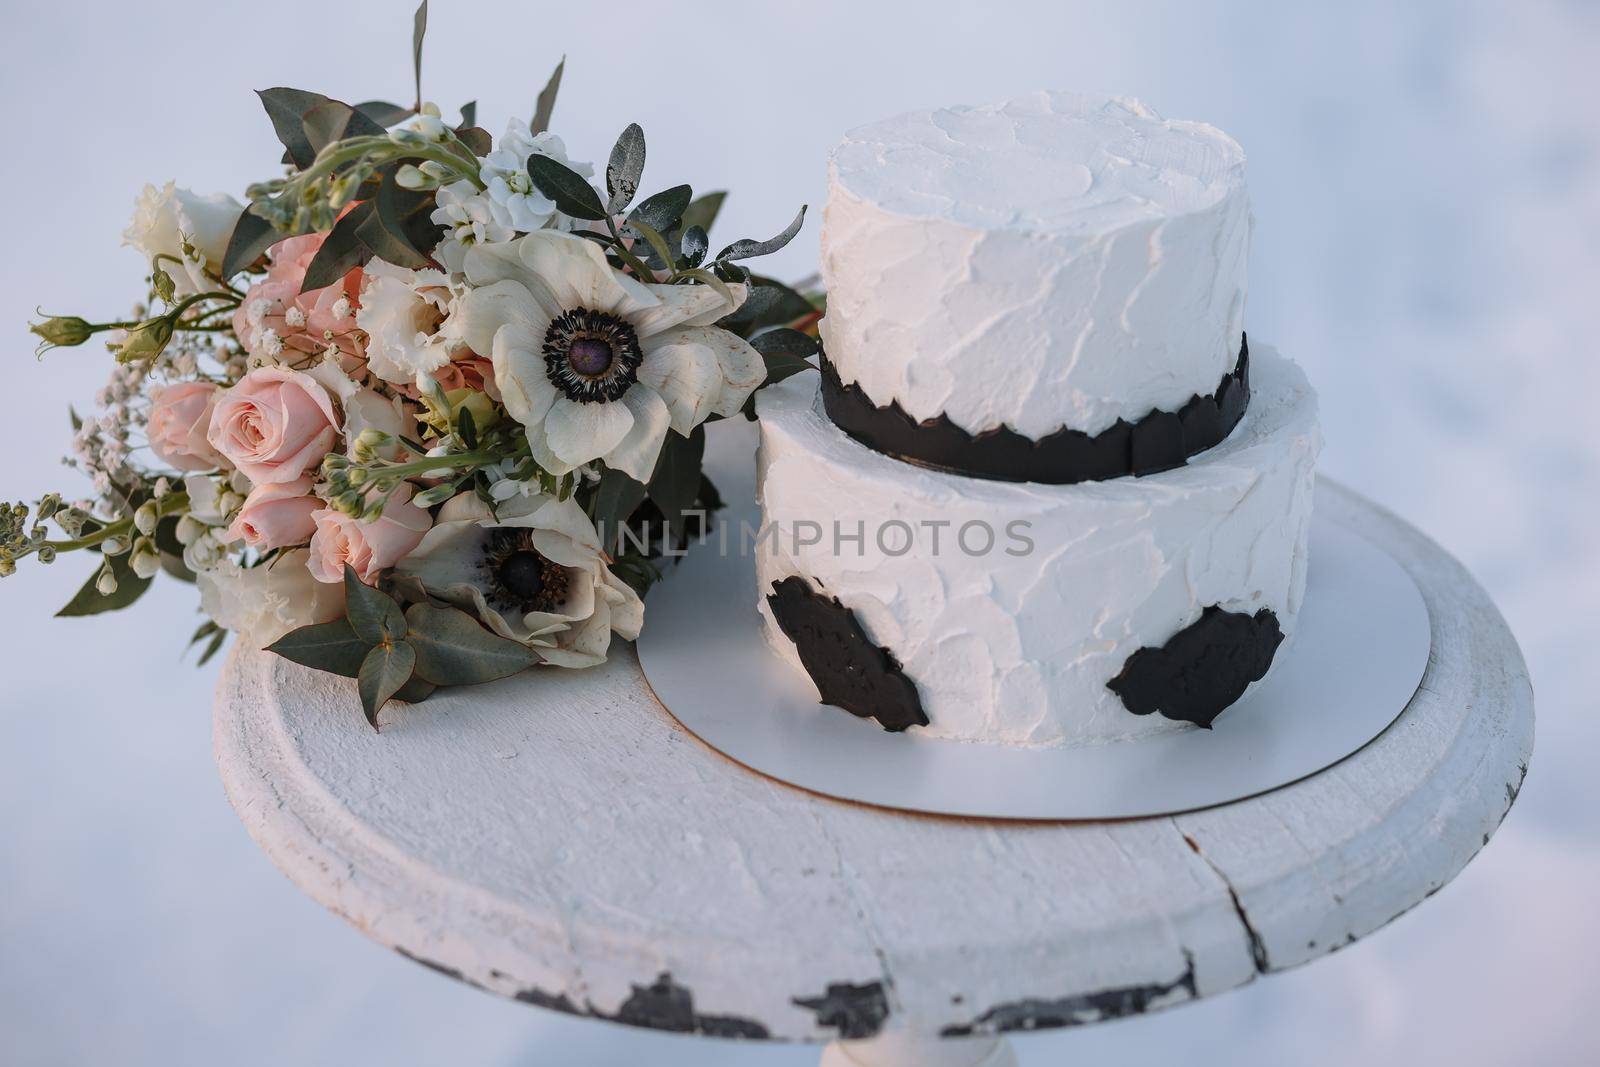 A cake in black and white design, standing on a stand in a winter forest on the snow. There is a wedding bouquet nearby by deandy